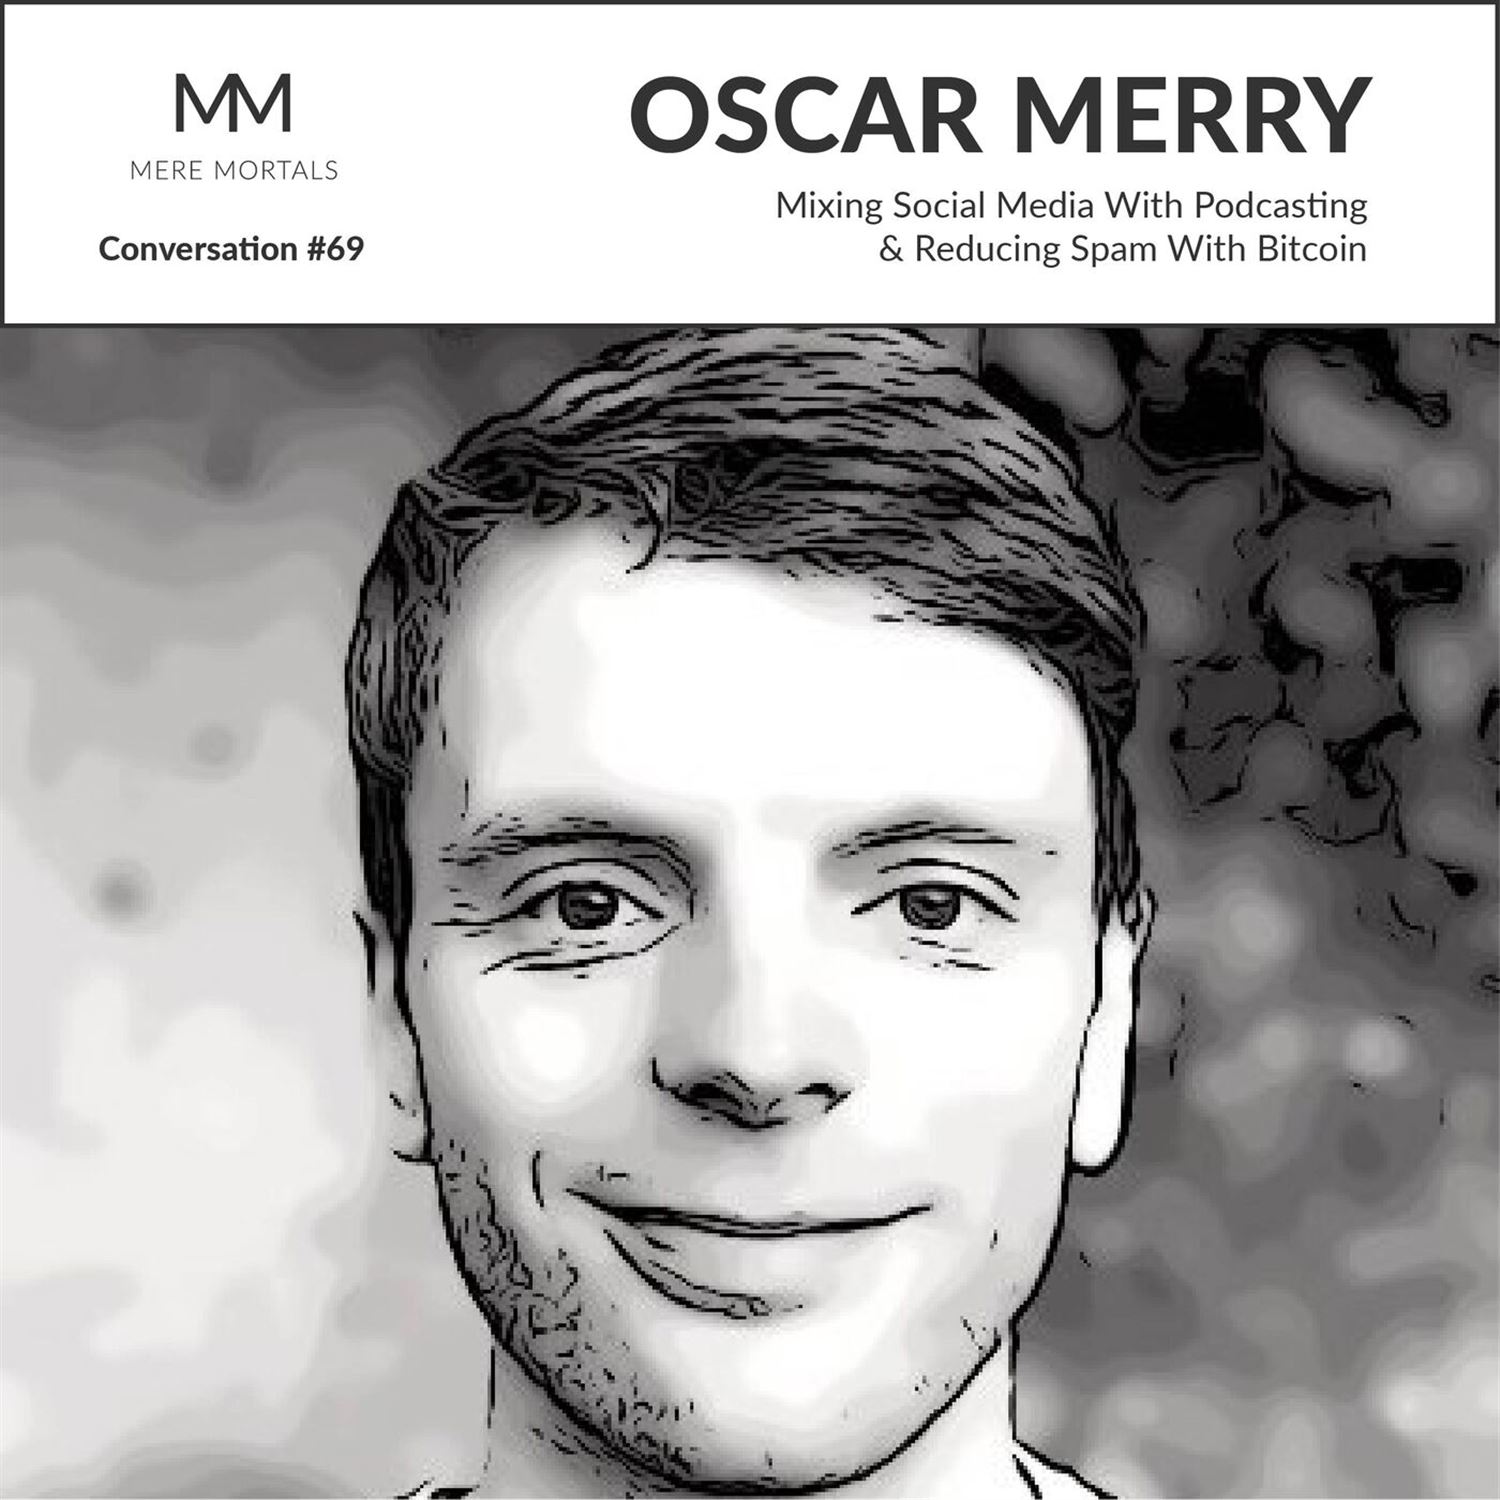 OSCAR MERRY | Mixing Social Media With Podcasting & Reducing Spam With Bitcoin